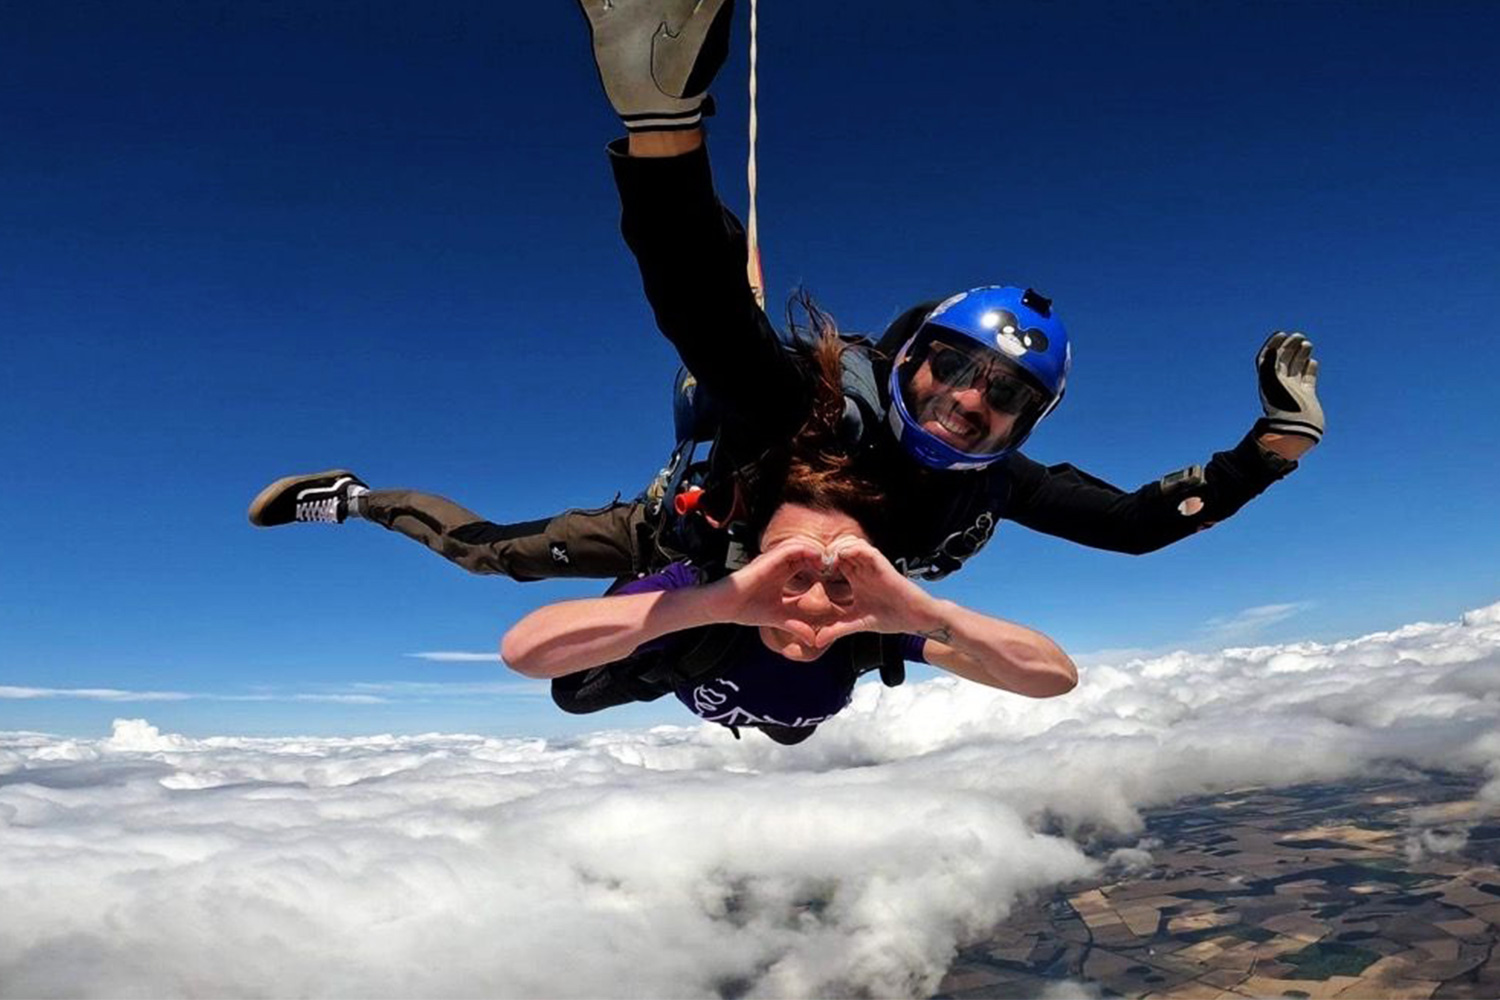 Ocean Holidays skydiving for charity